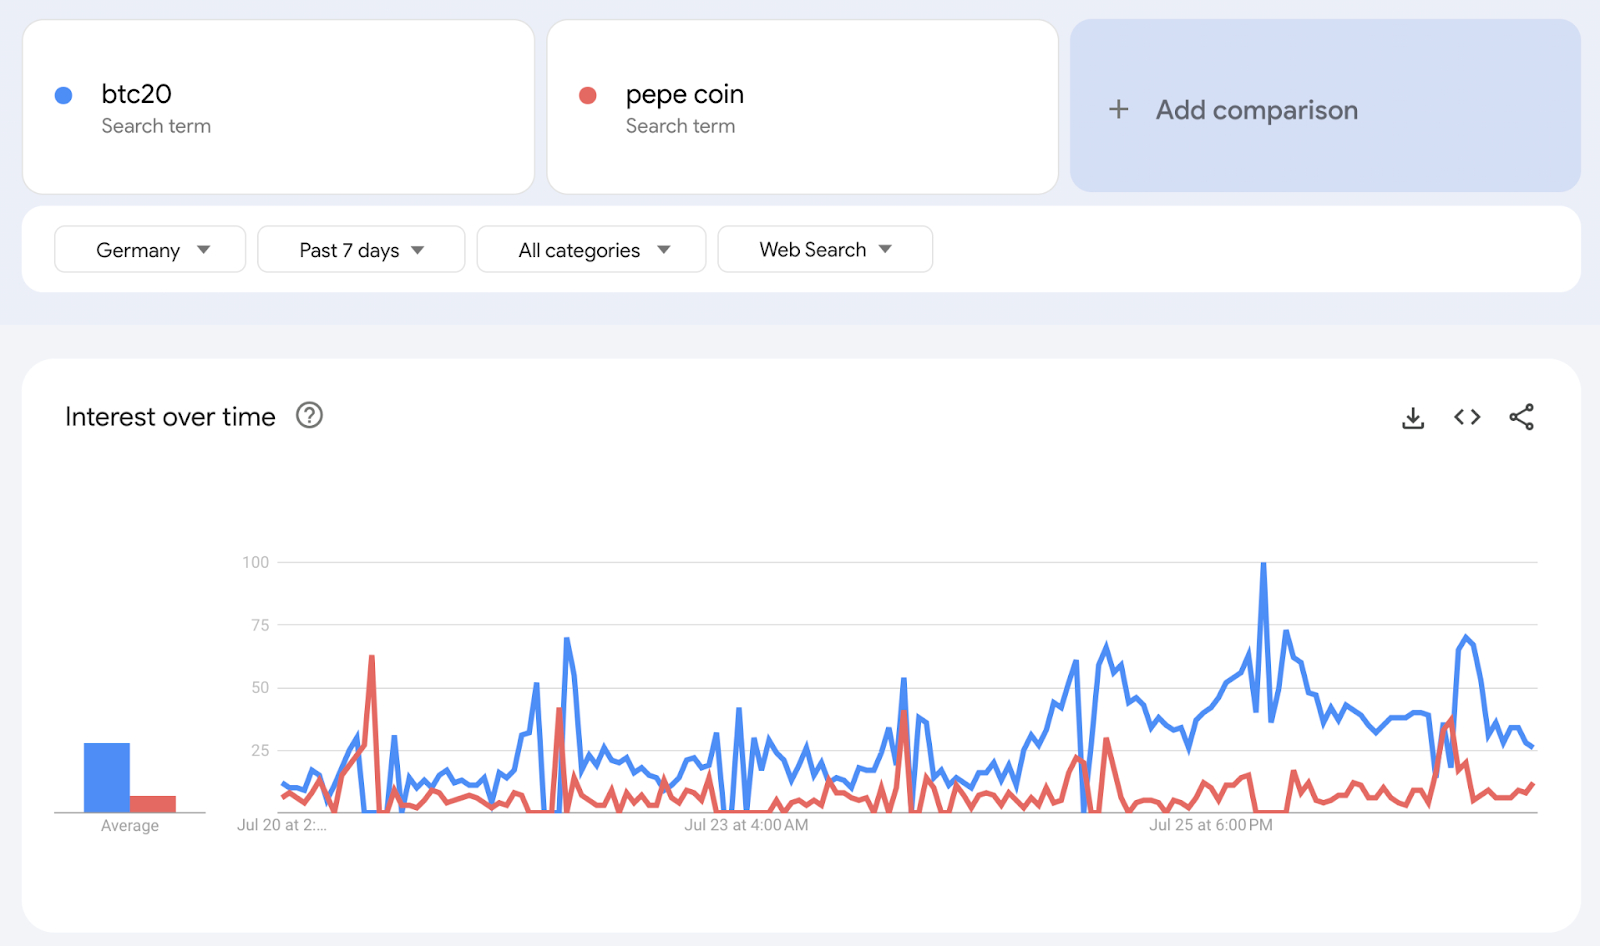 btc20 beats pepe coin in US on google trends when active trading session begins